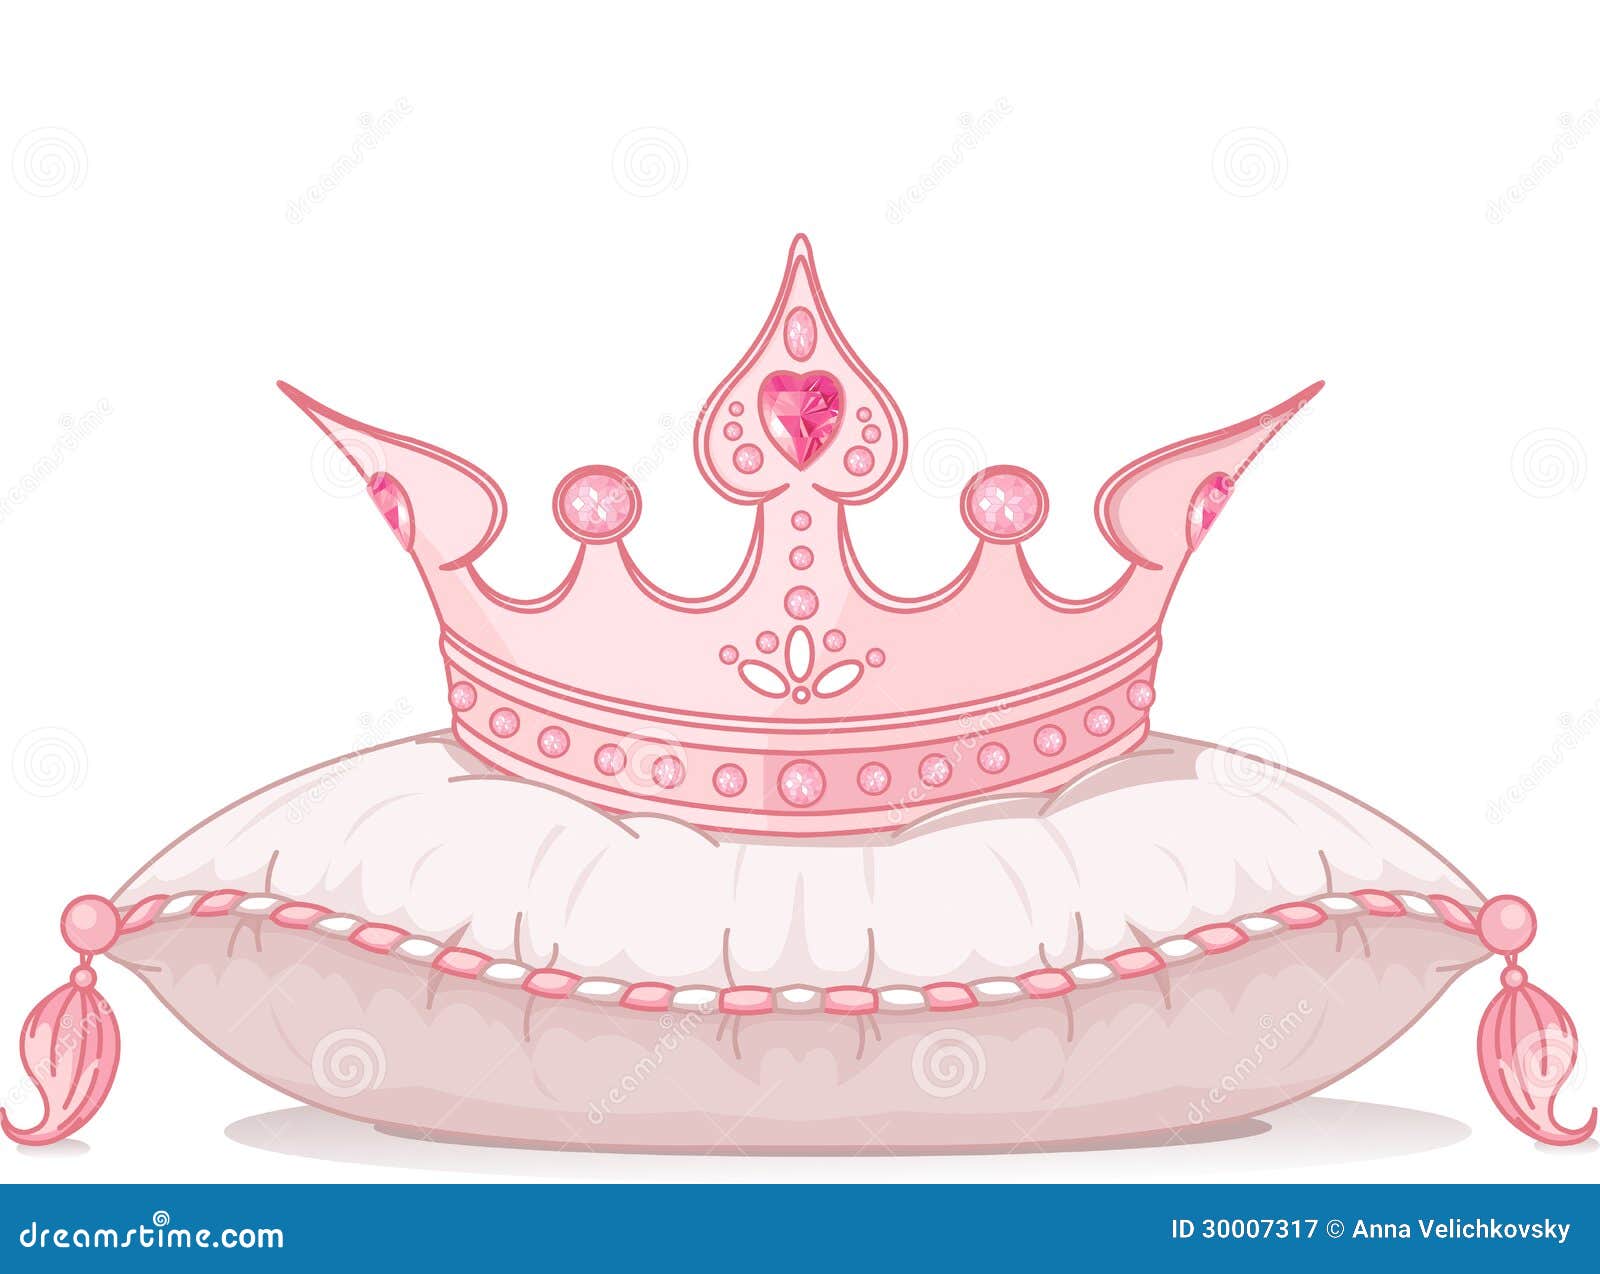 crown on the pillow